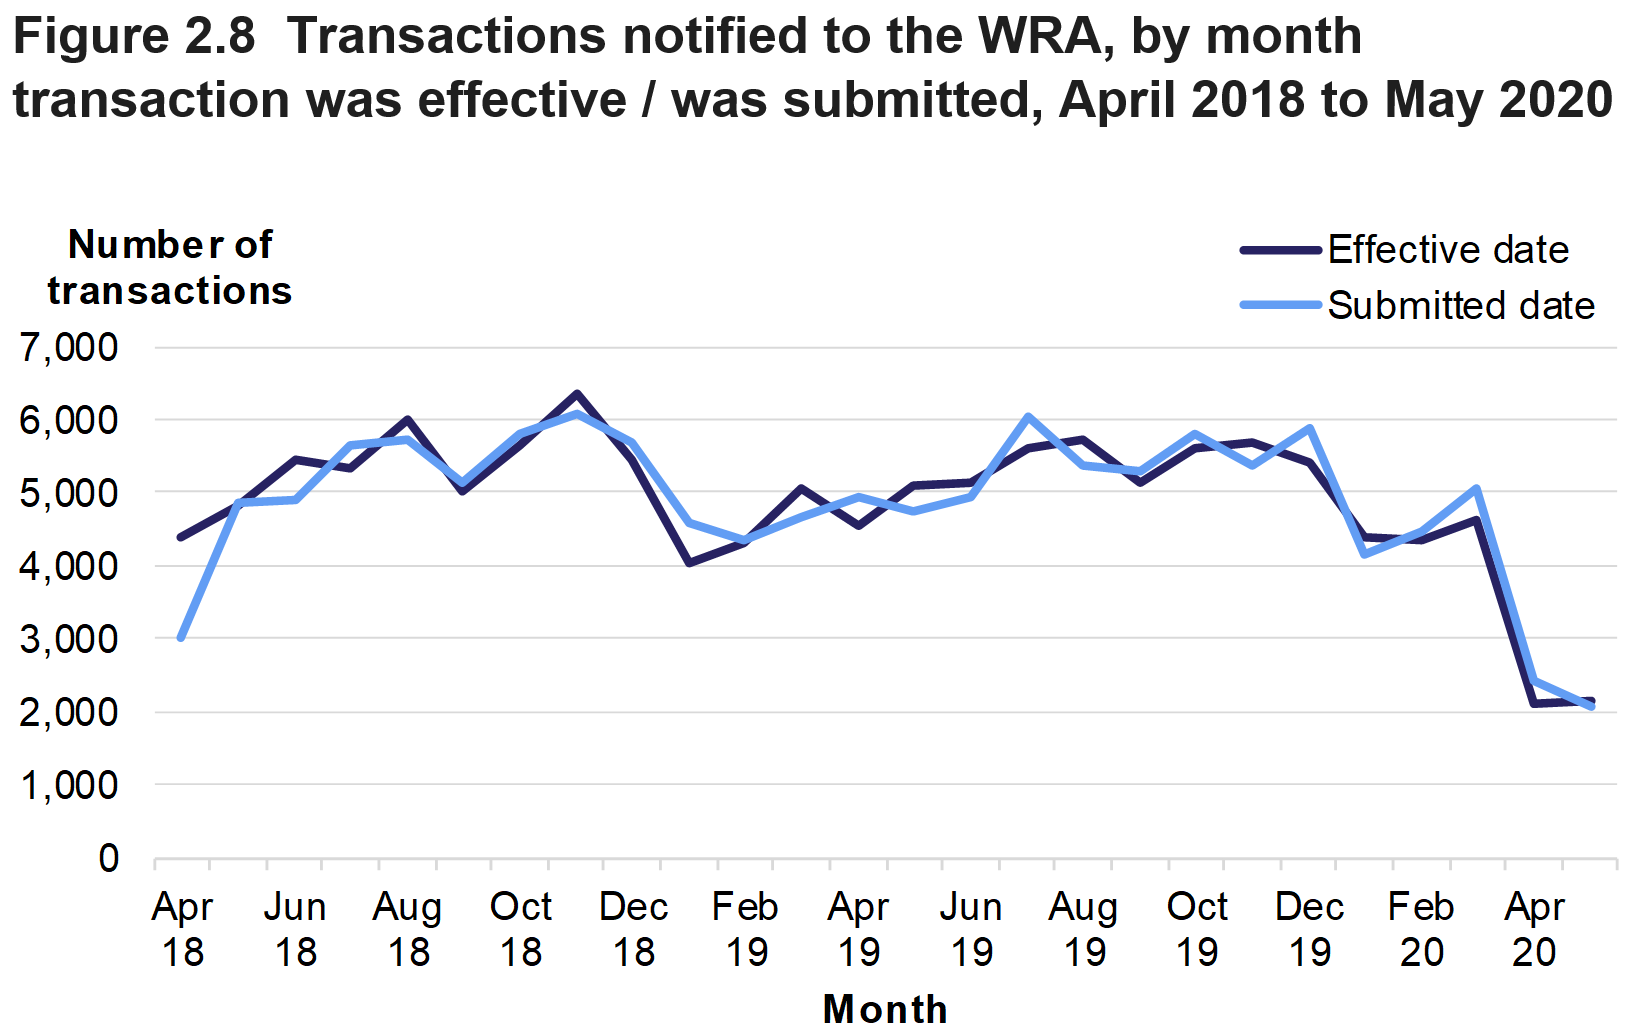 Figure 2.8 shows the monthly numbers of transactions which became effective and which were submitted, from April 2018 to May 2020.